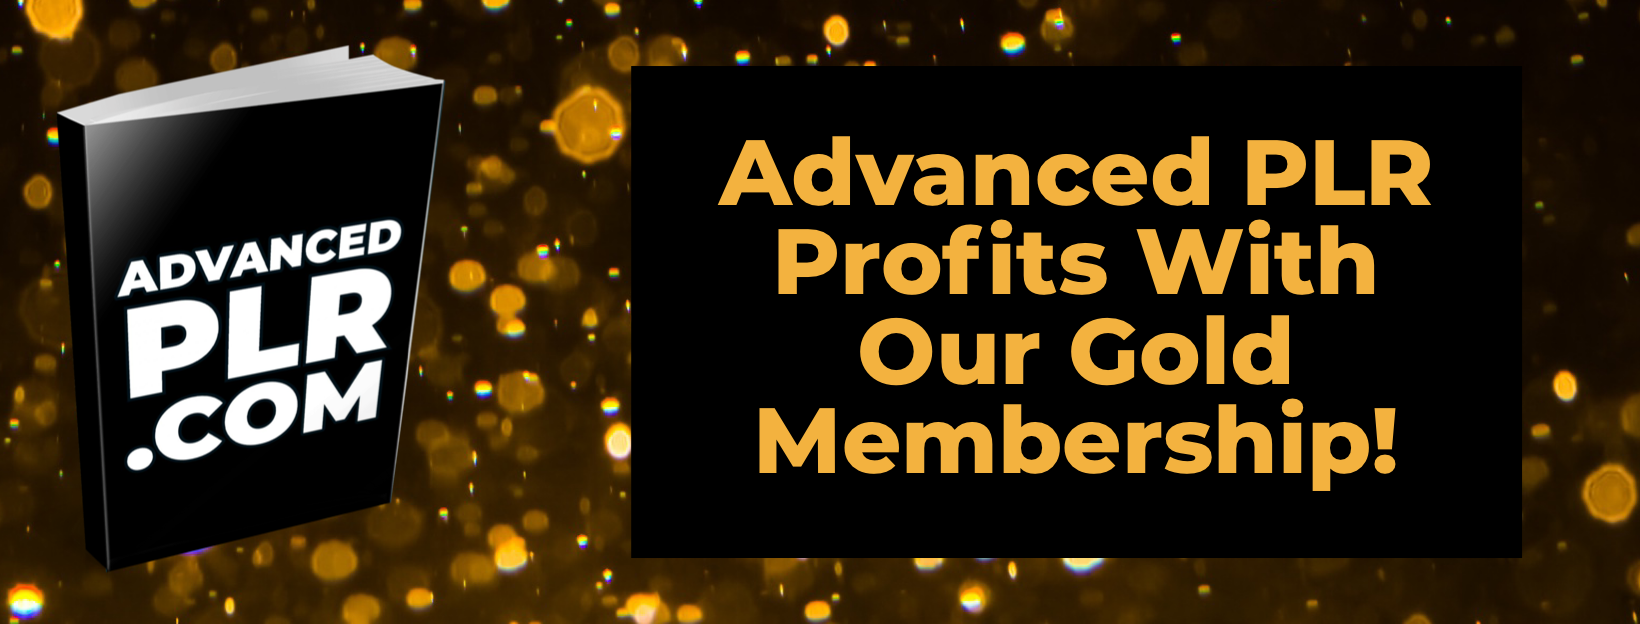 Our AdvancedPLR Gold Membership banner